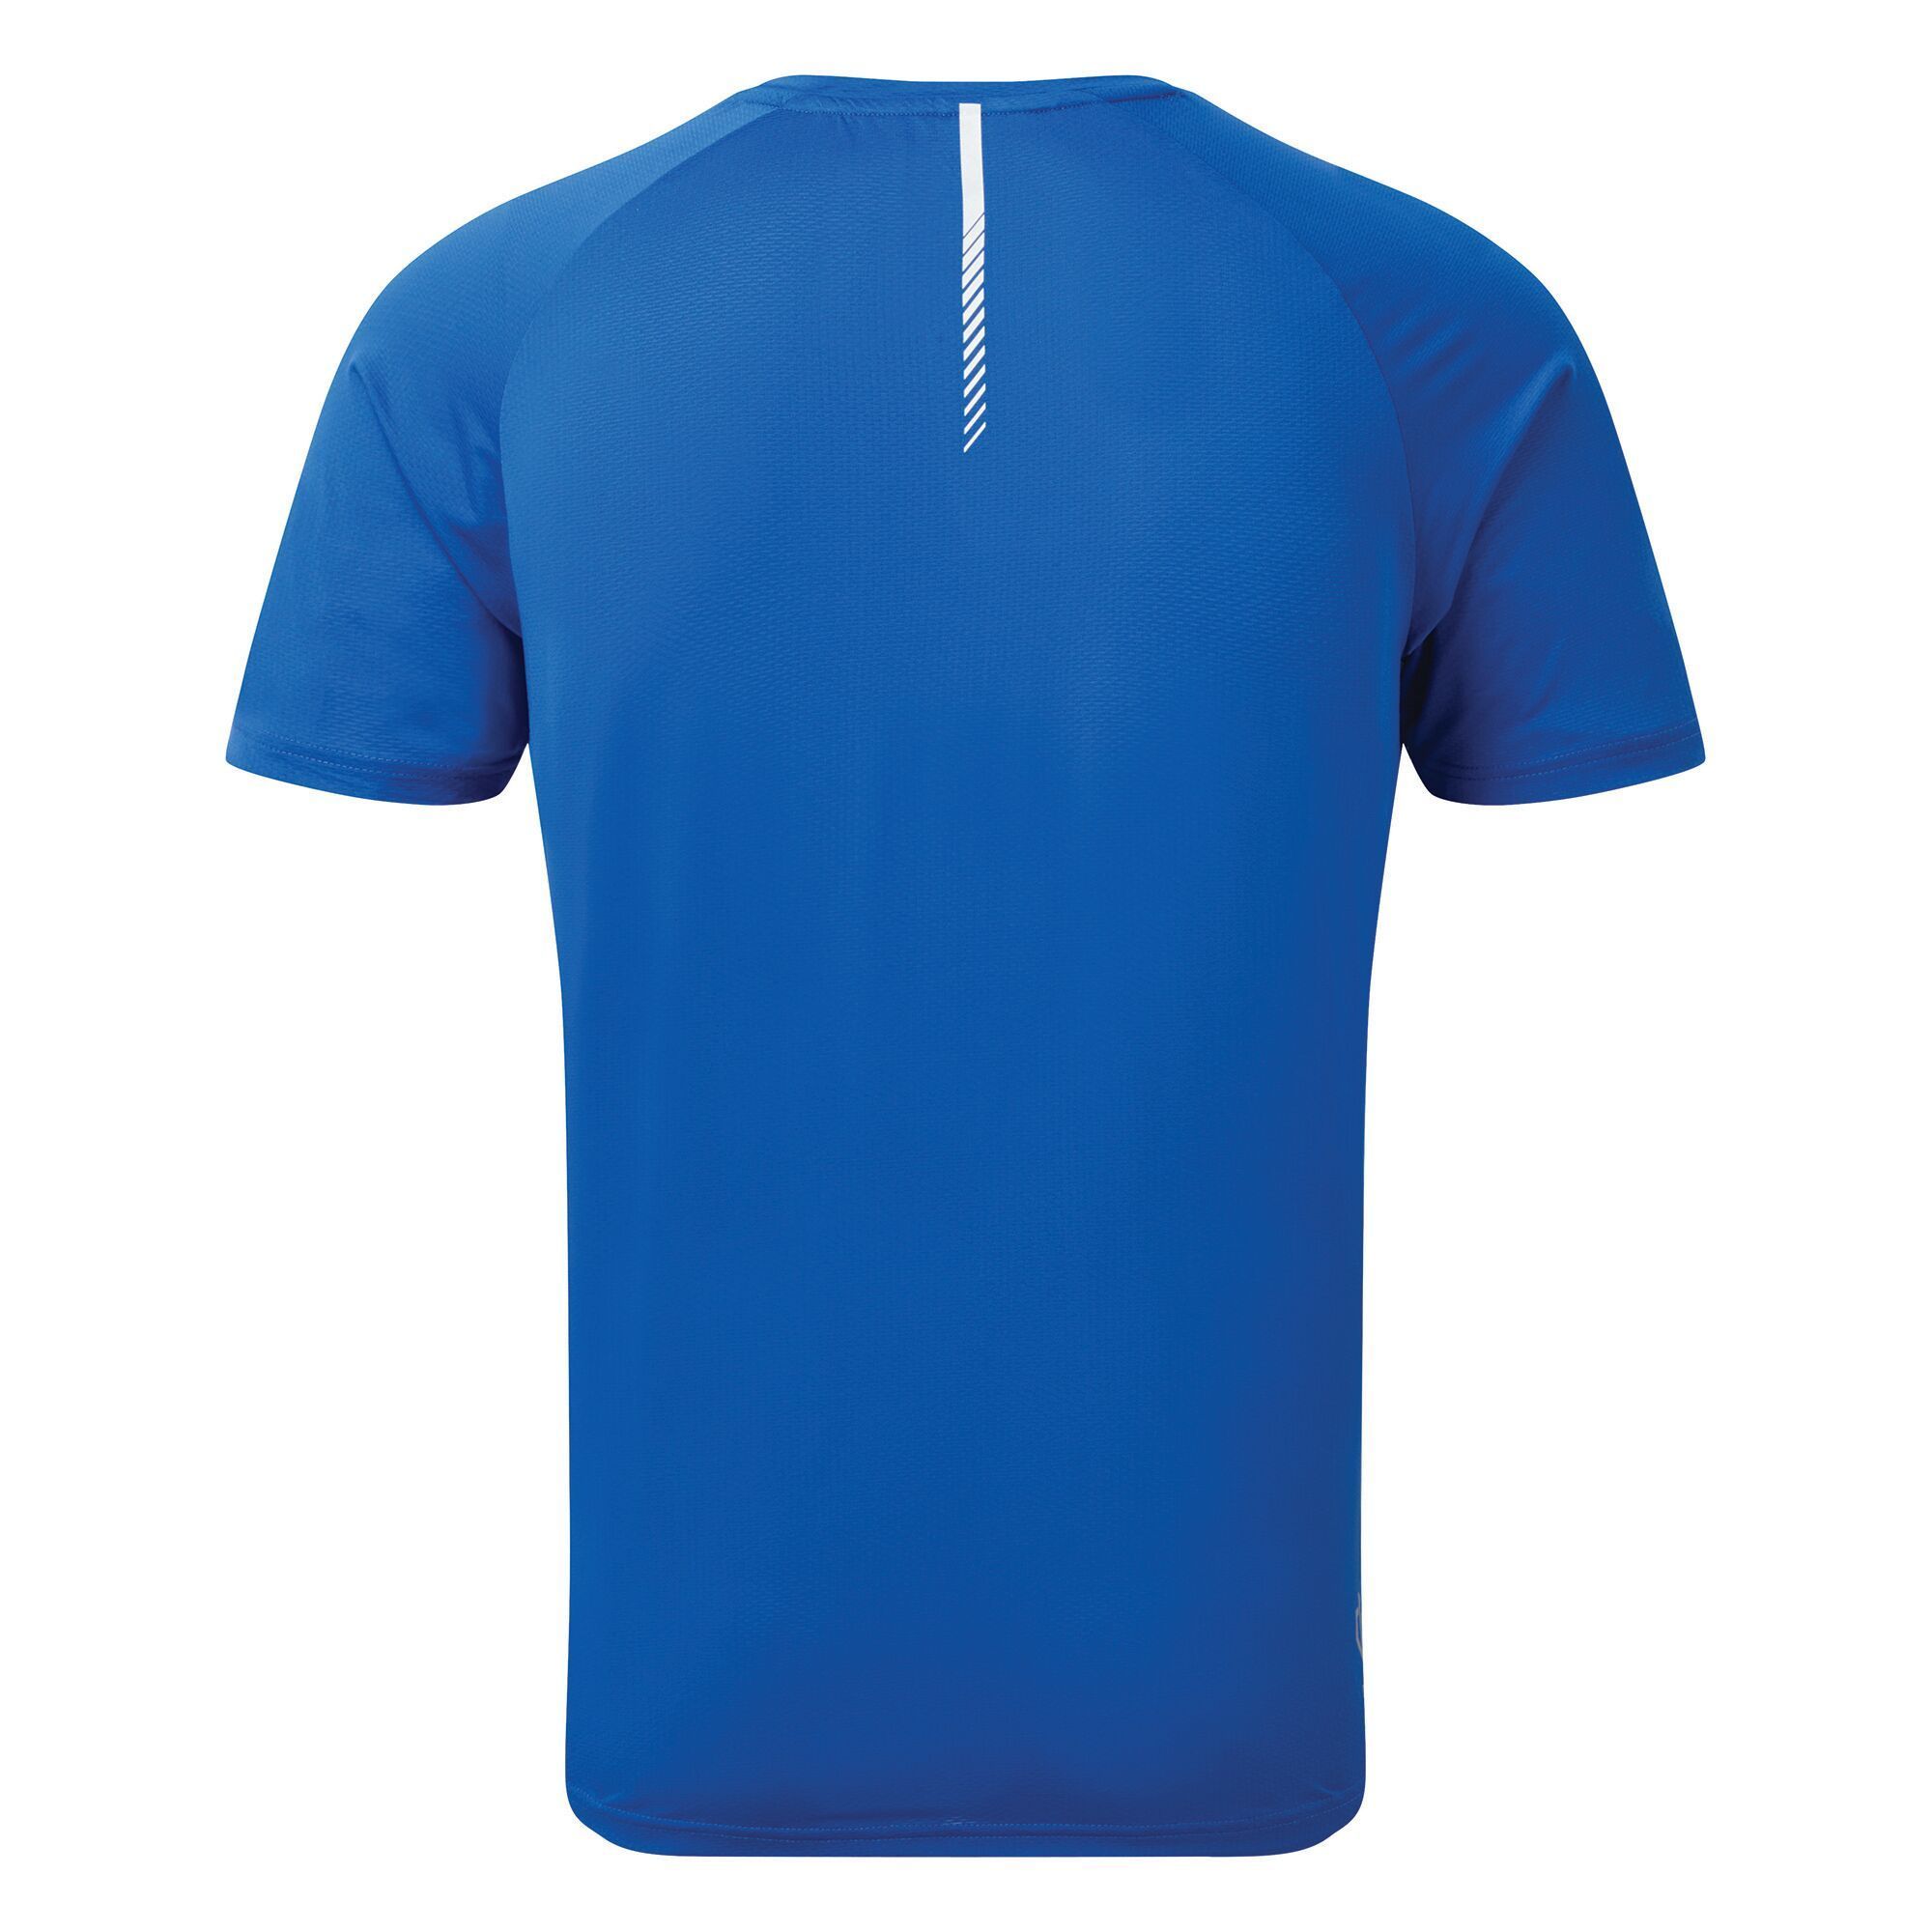 Material: 88% Polyester (Q-Wic lightweight polyester fabric), 12% Elastane. Solid colour short sleeved t-shirt with fabric which moves moisture away from the skin to keep you feeling comfortable during high-energy workouts. Soft and quick drying.